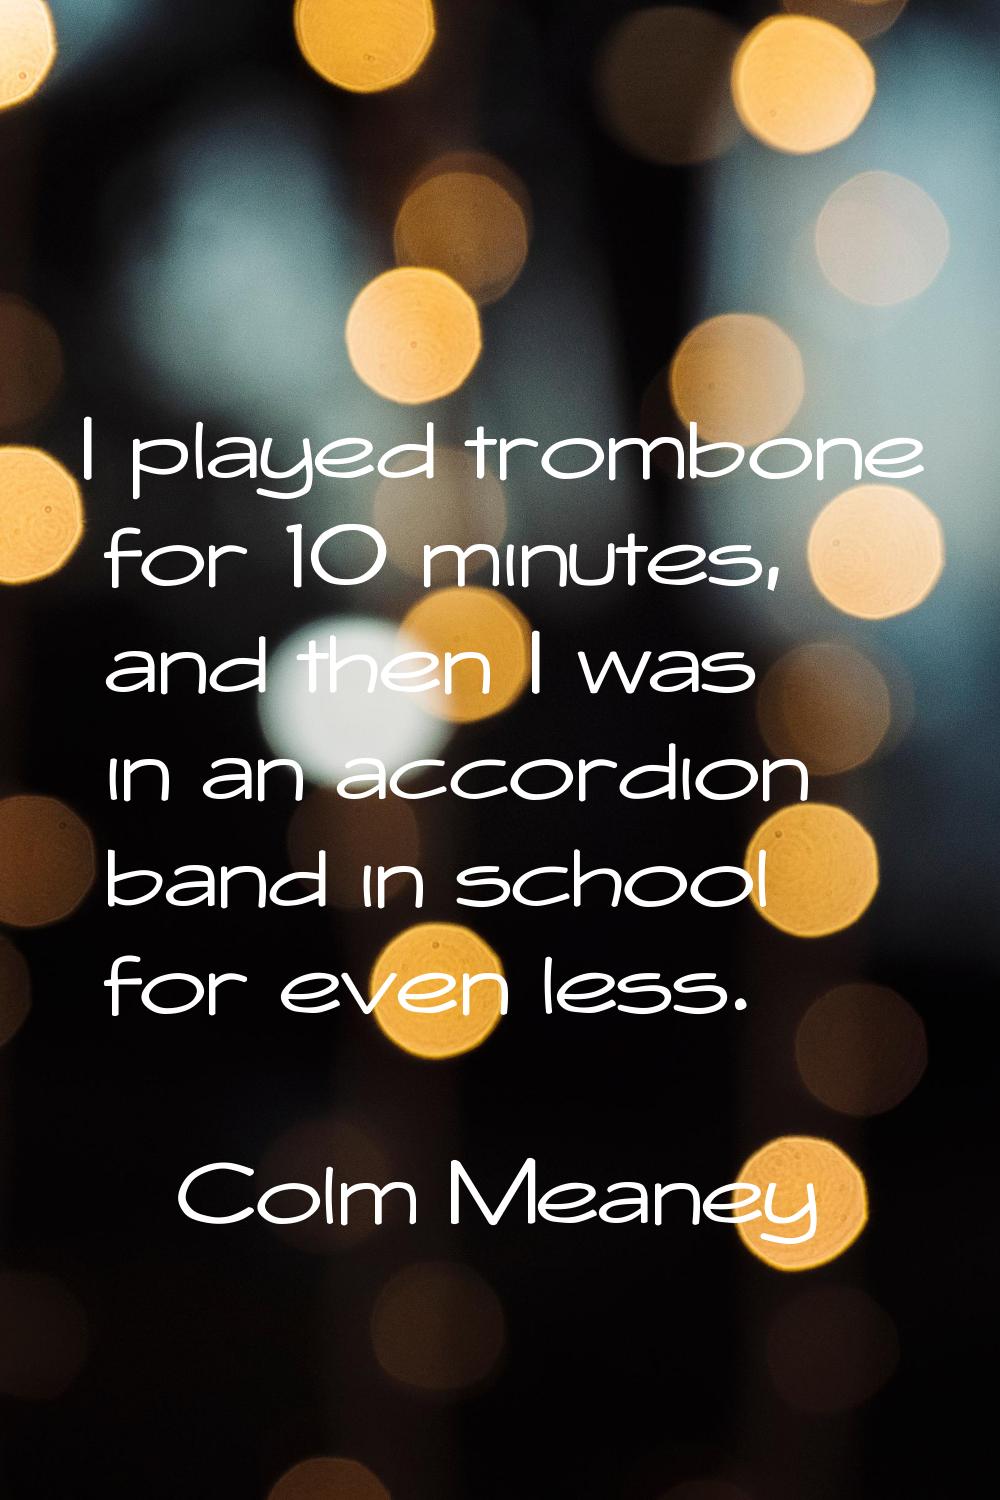 I played trombone for 10 minutes, and then I was in an accordion band in school for even less.